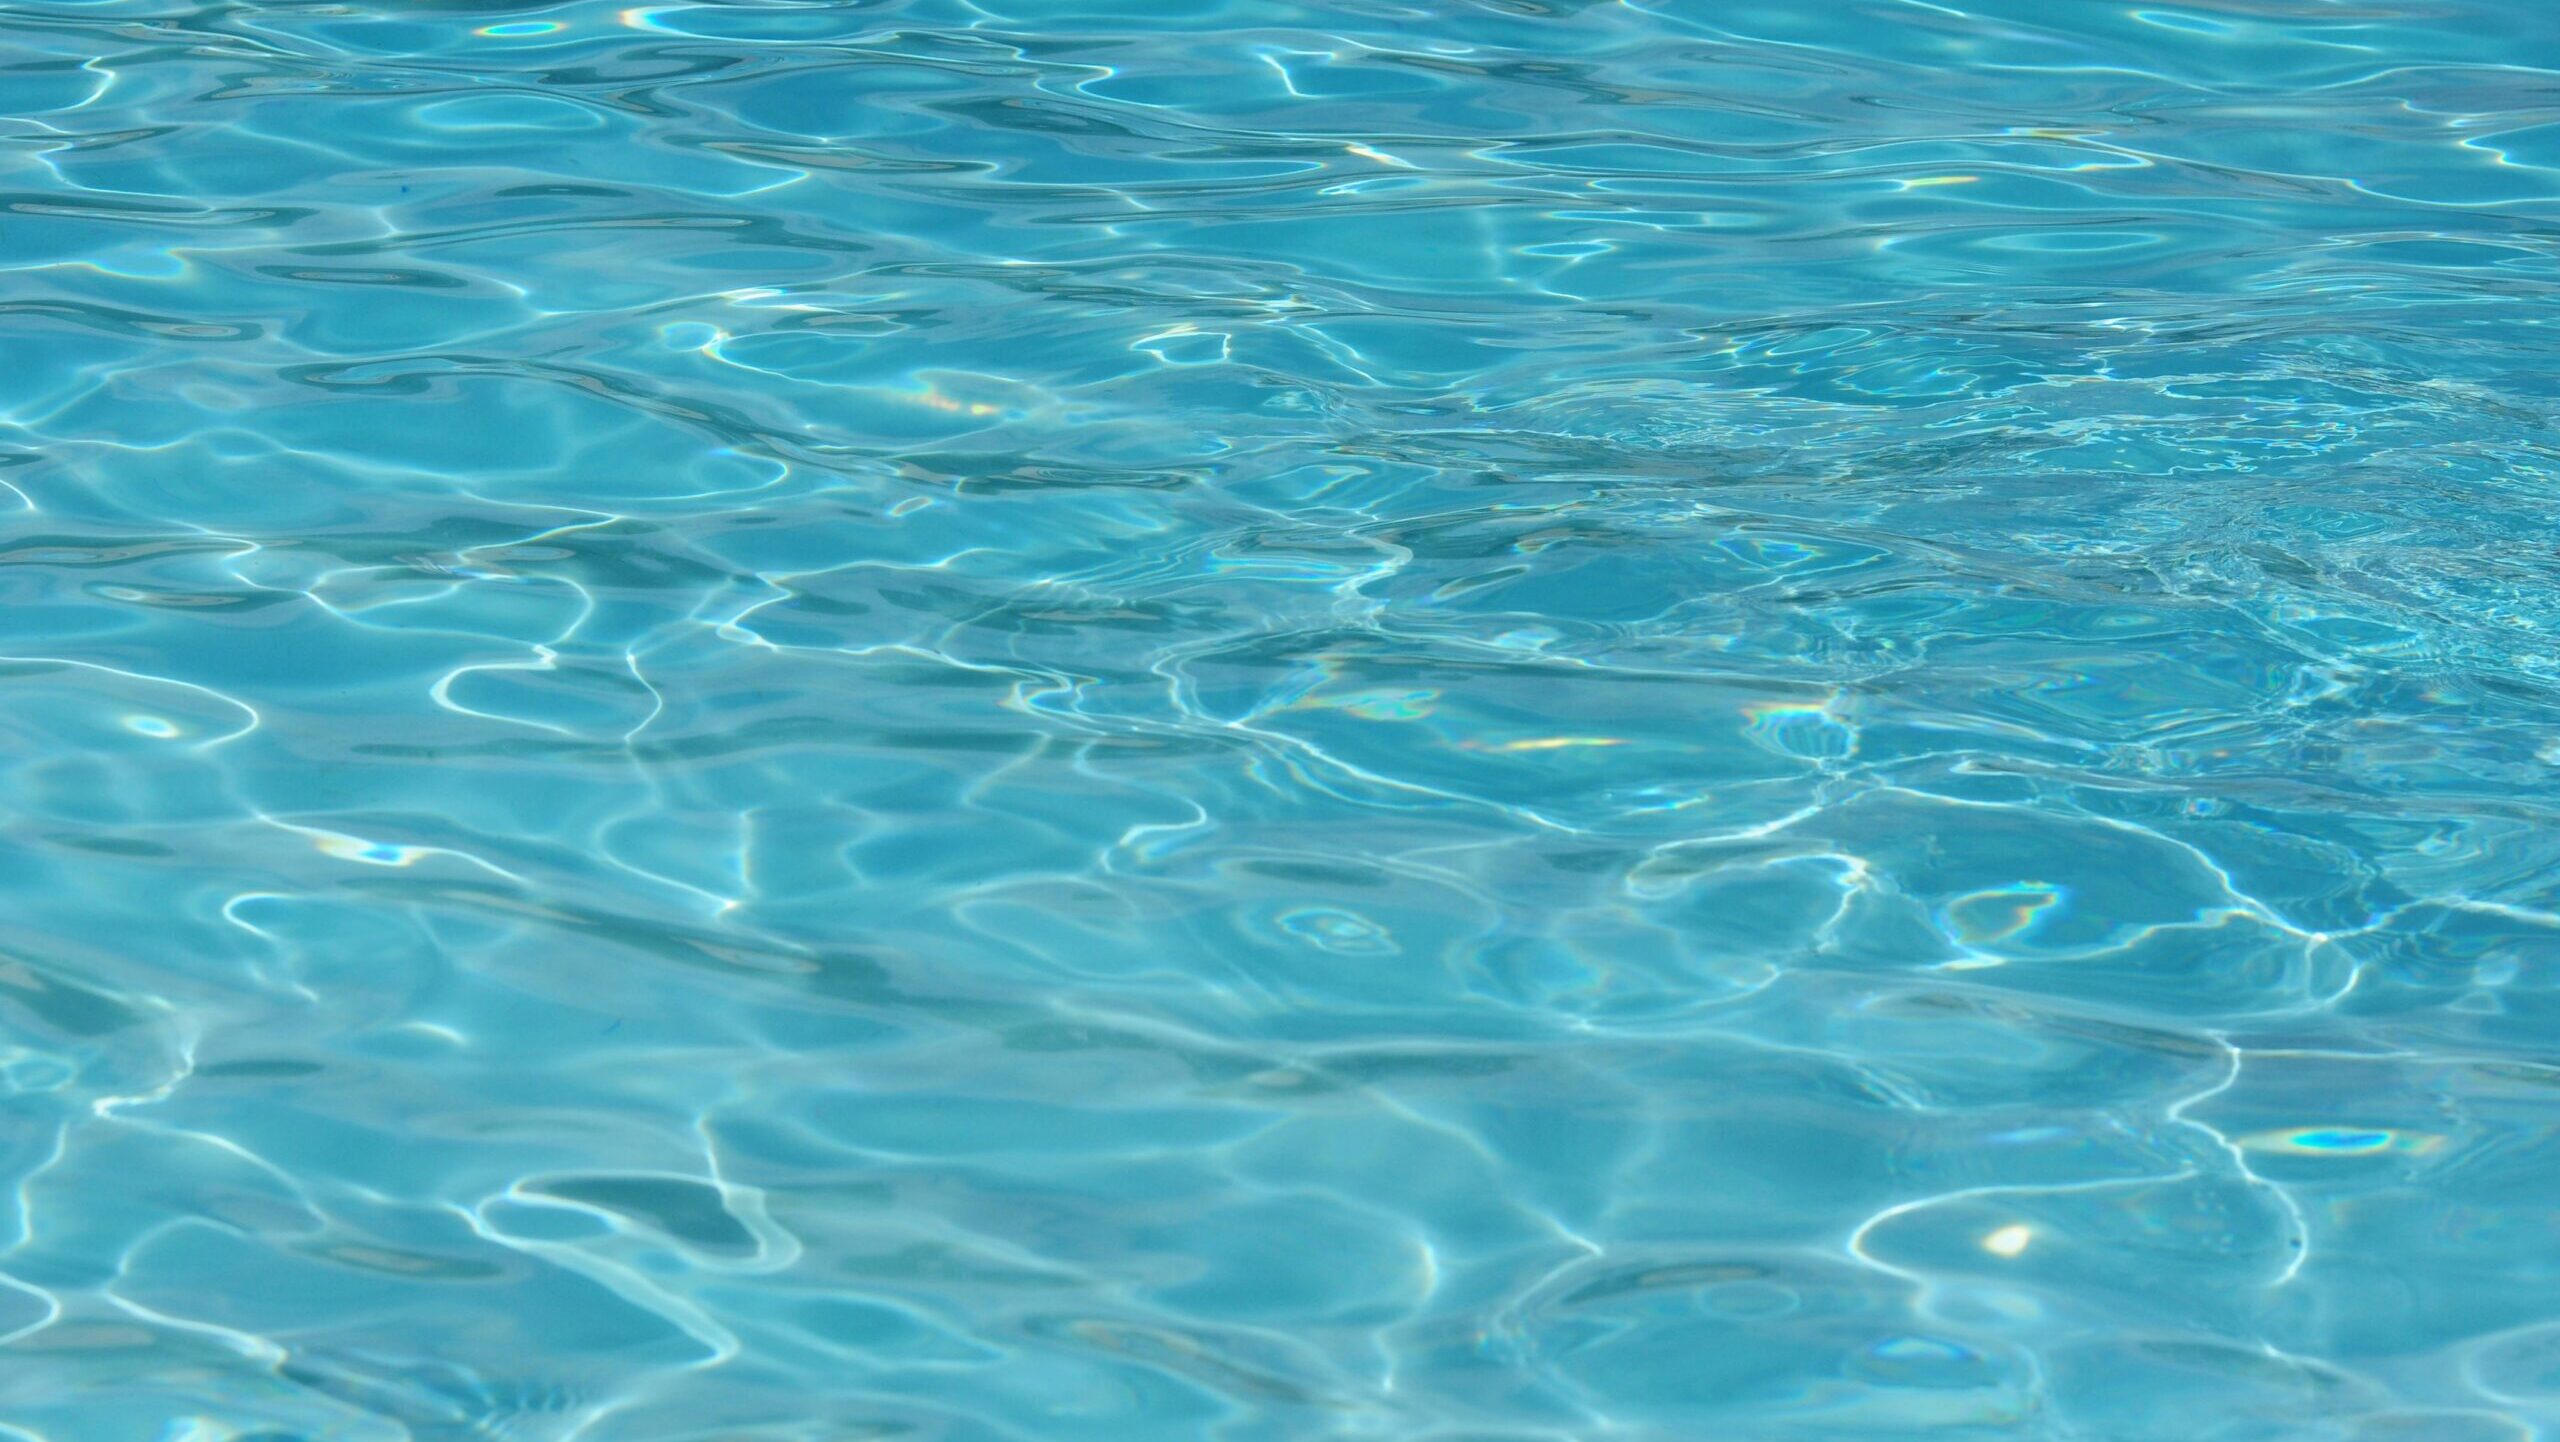 A two-year-old girl nearly drowned on Saturday in Chandler. (Pexels photo)...